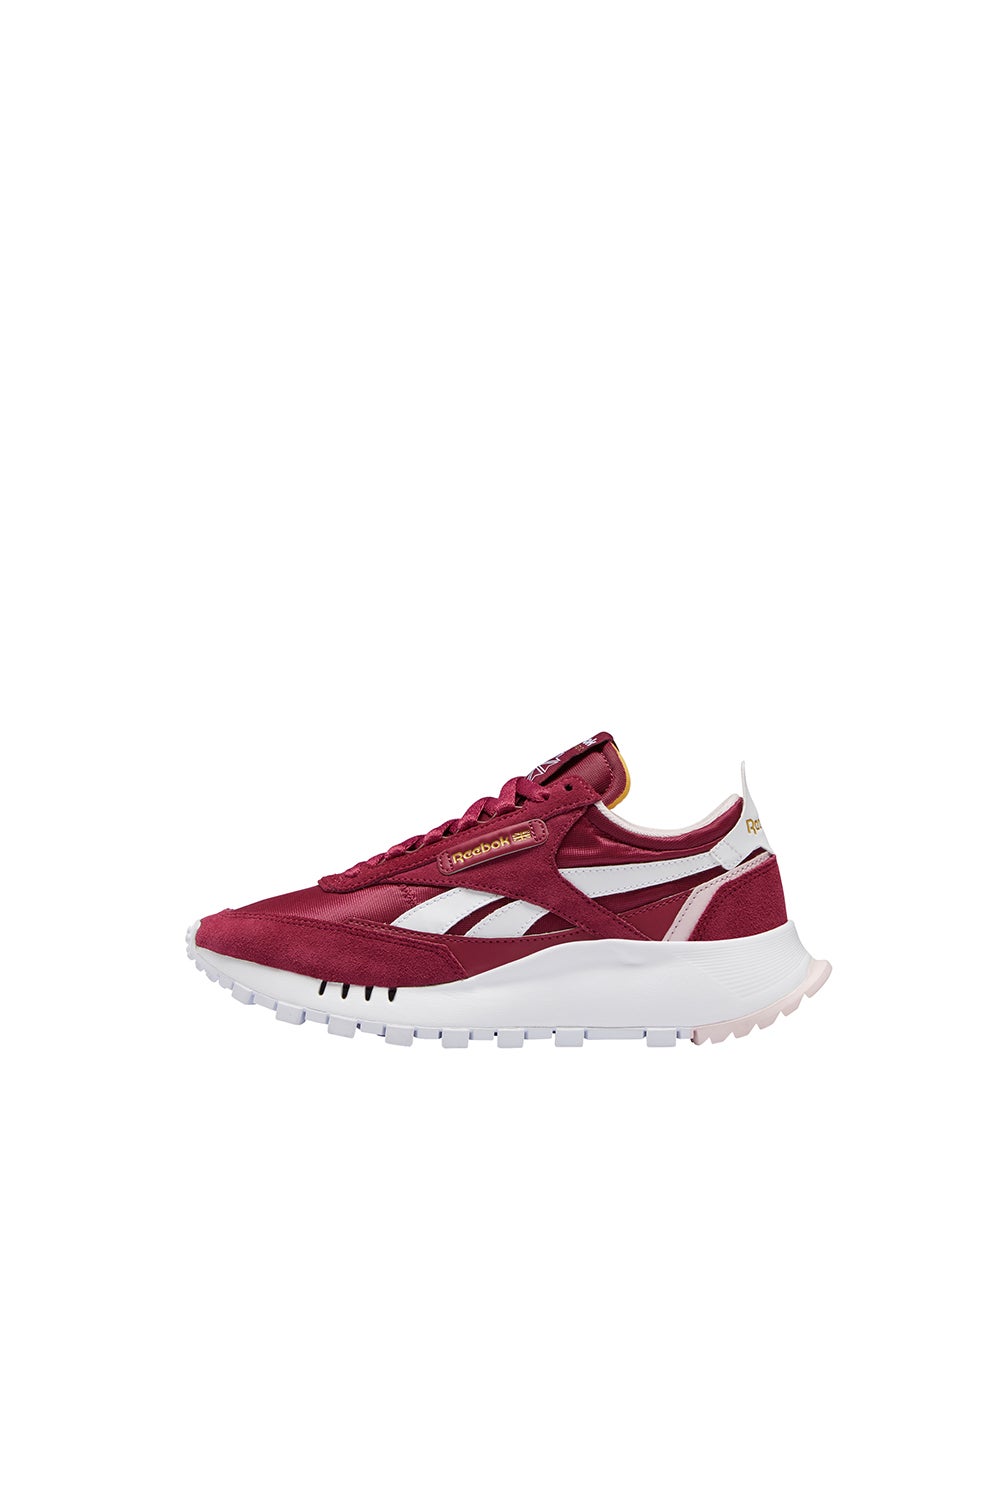 Reebok Classic Leather Legacy Punch Berry/FTWR White/Frost Berry